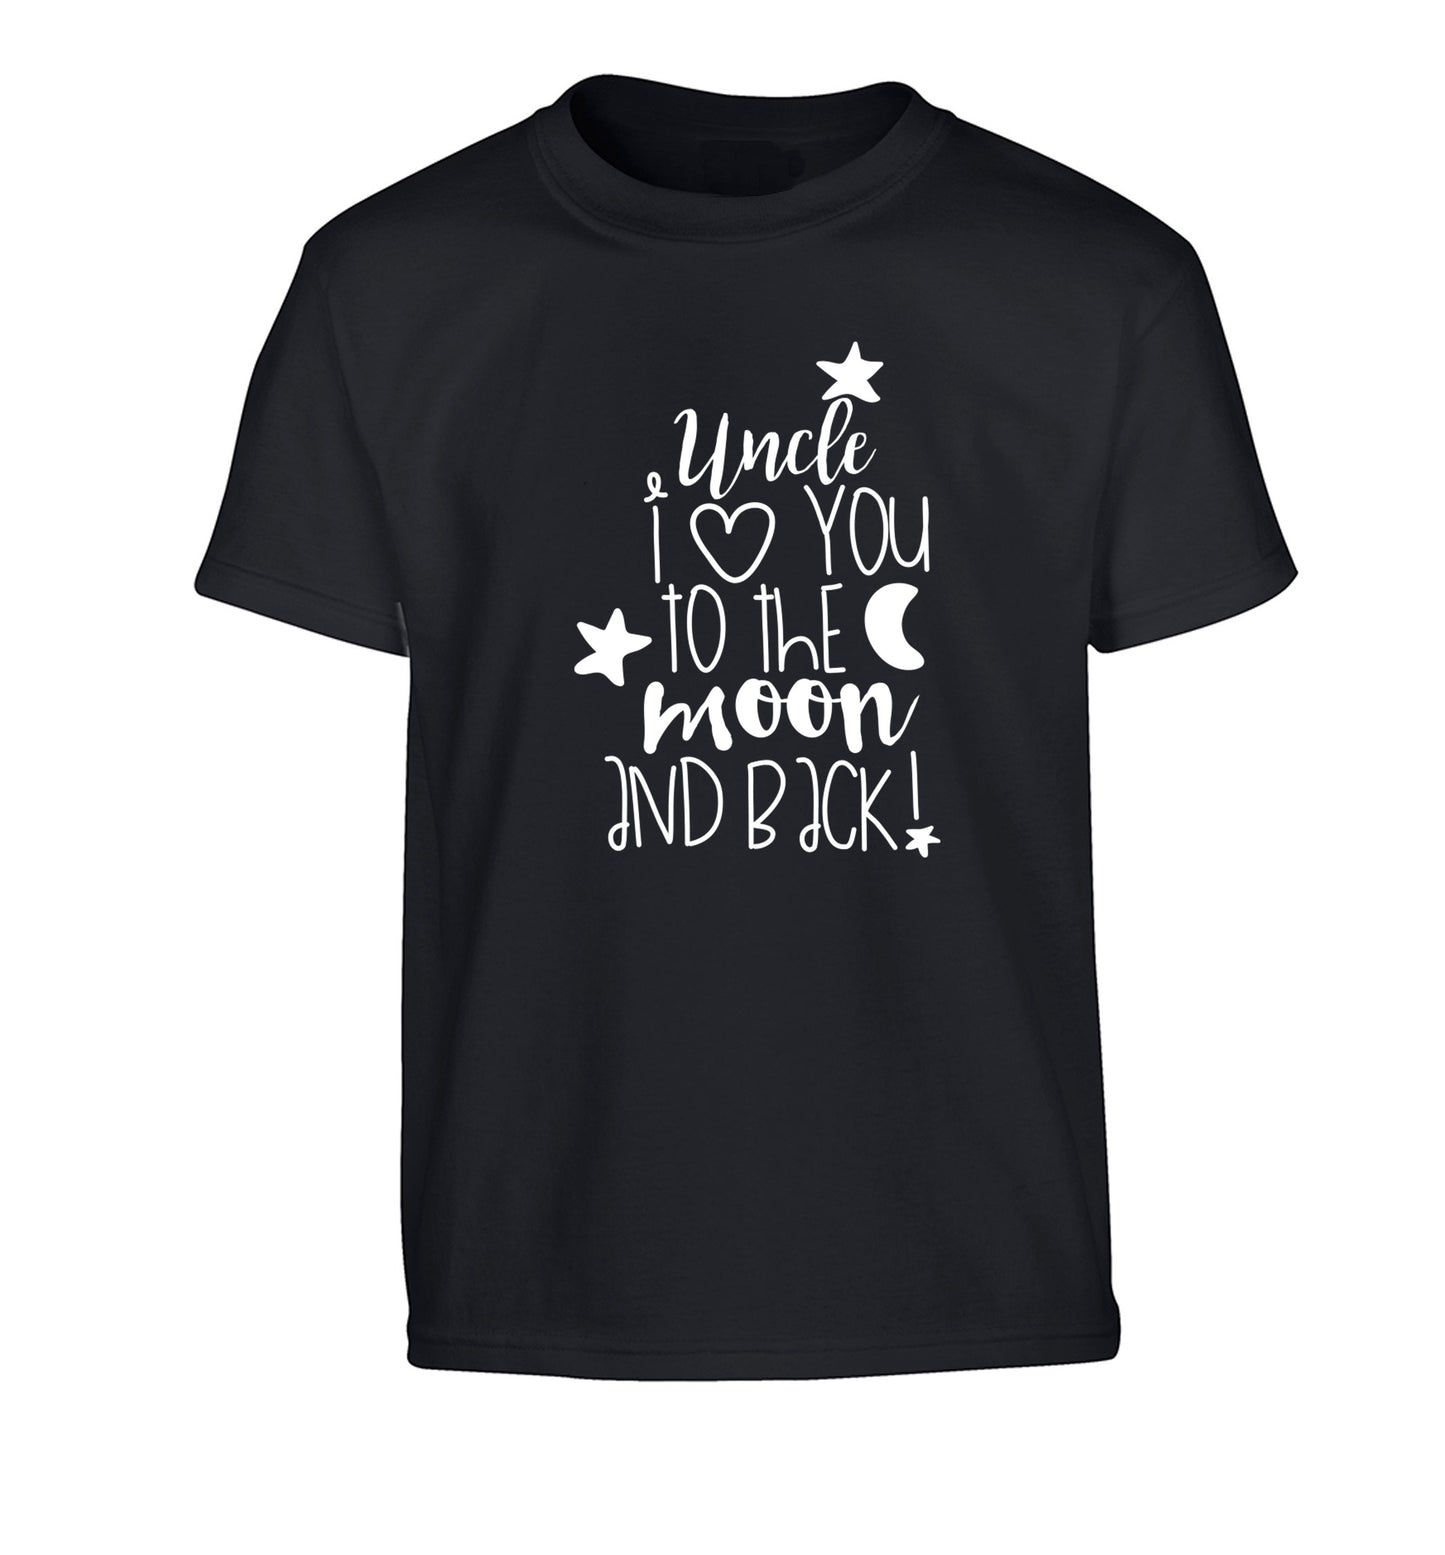 Uncle I love you to the moon and back Children's black Tshirt 12-14 Years